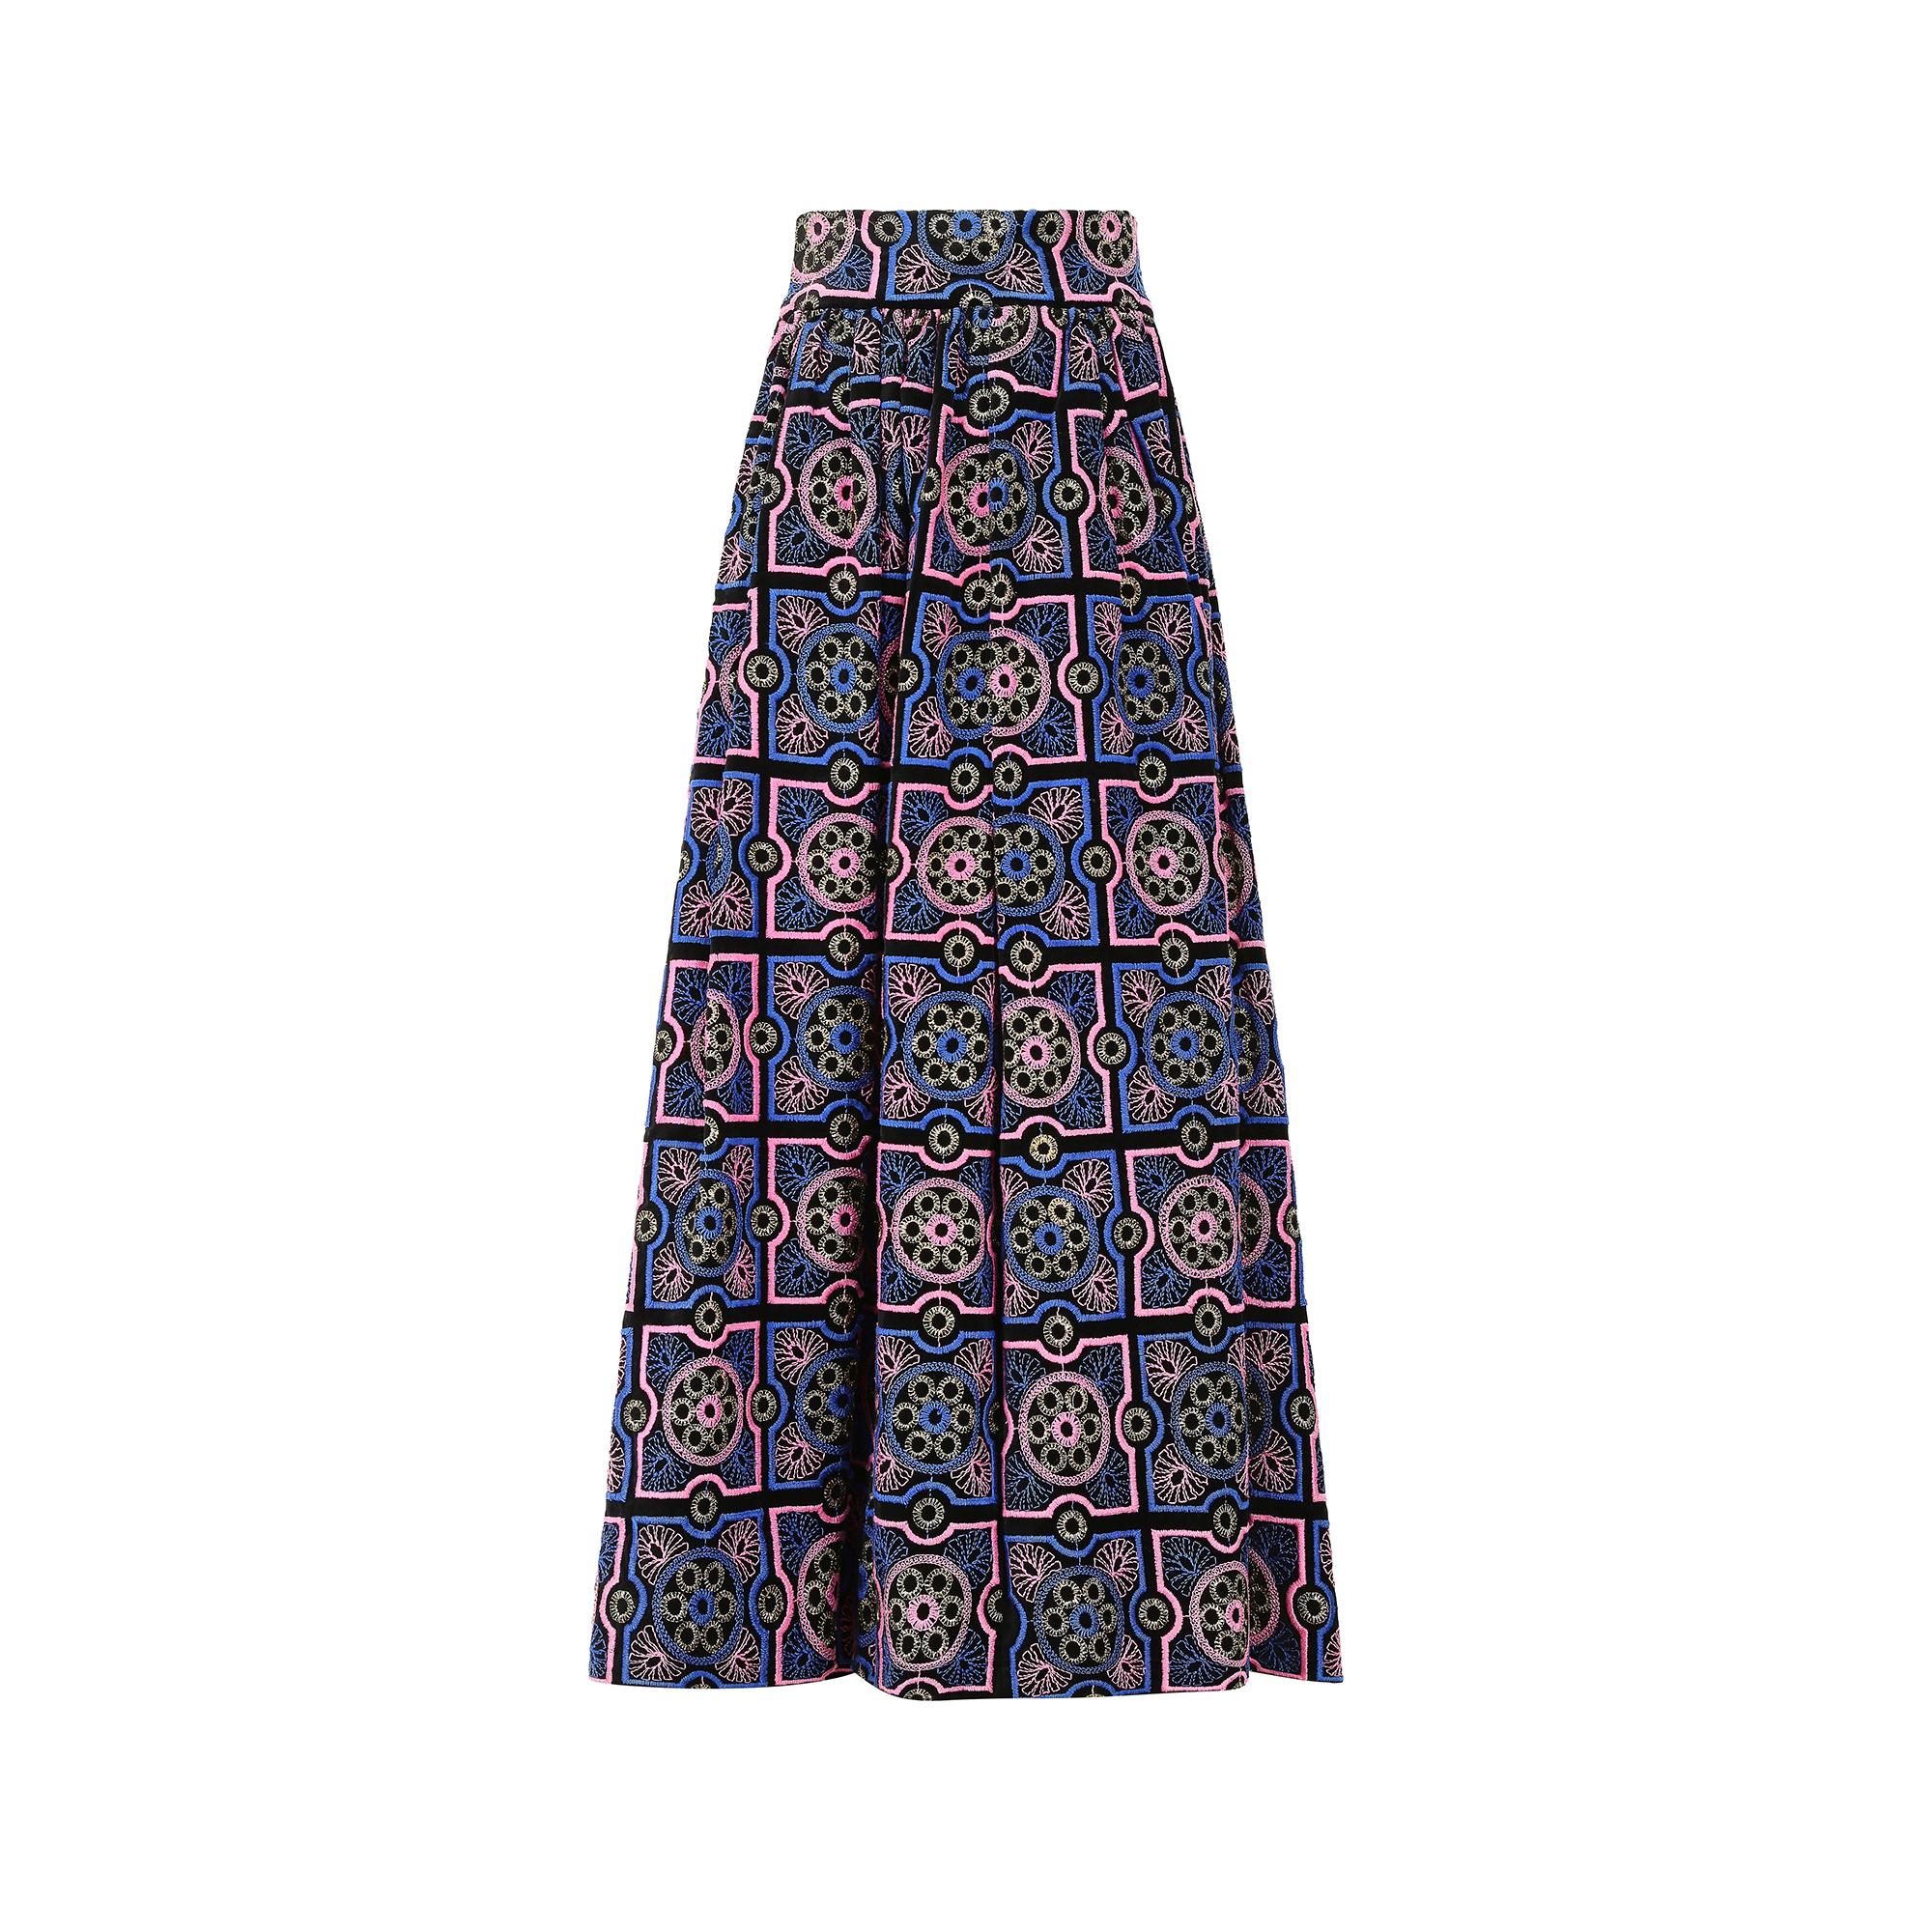 This exceptional, circa 1970, Adolfo Sardina black velvet embroidered maxi skirt is in excellent archival condition and ready to be worn for any statement occasion. It is expertly embroidered with luxurious pink, blue and gold threads that create a